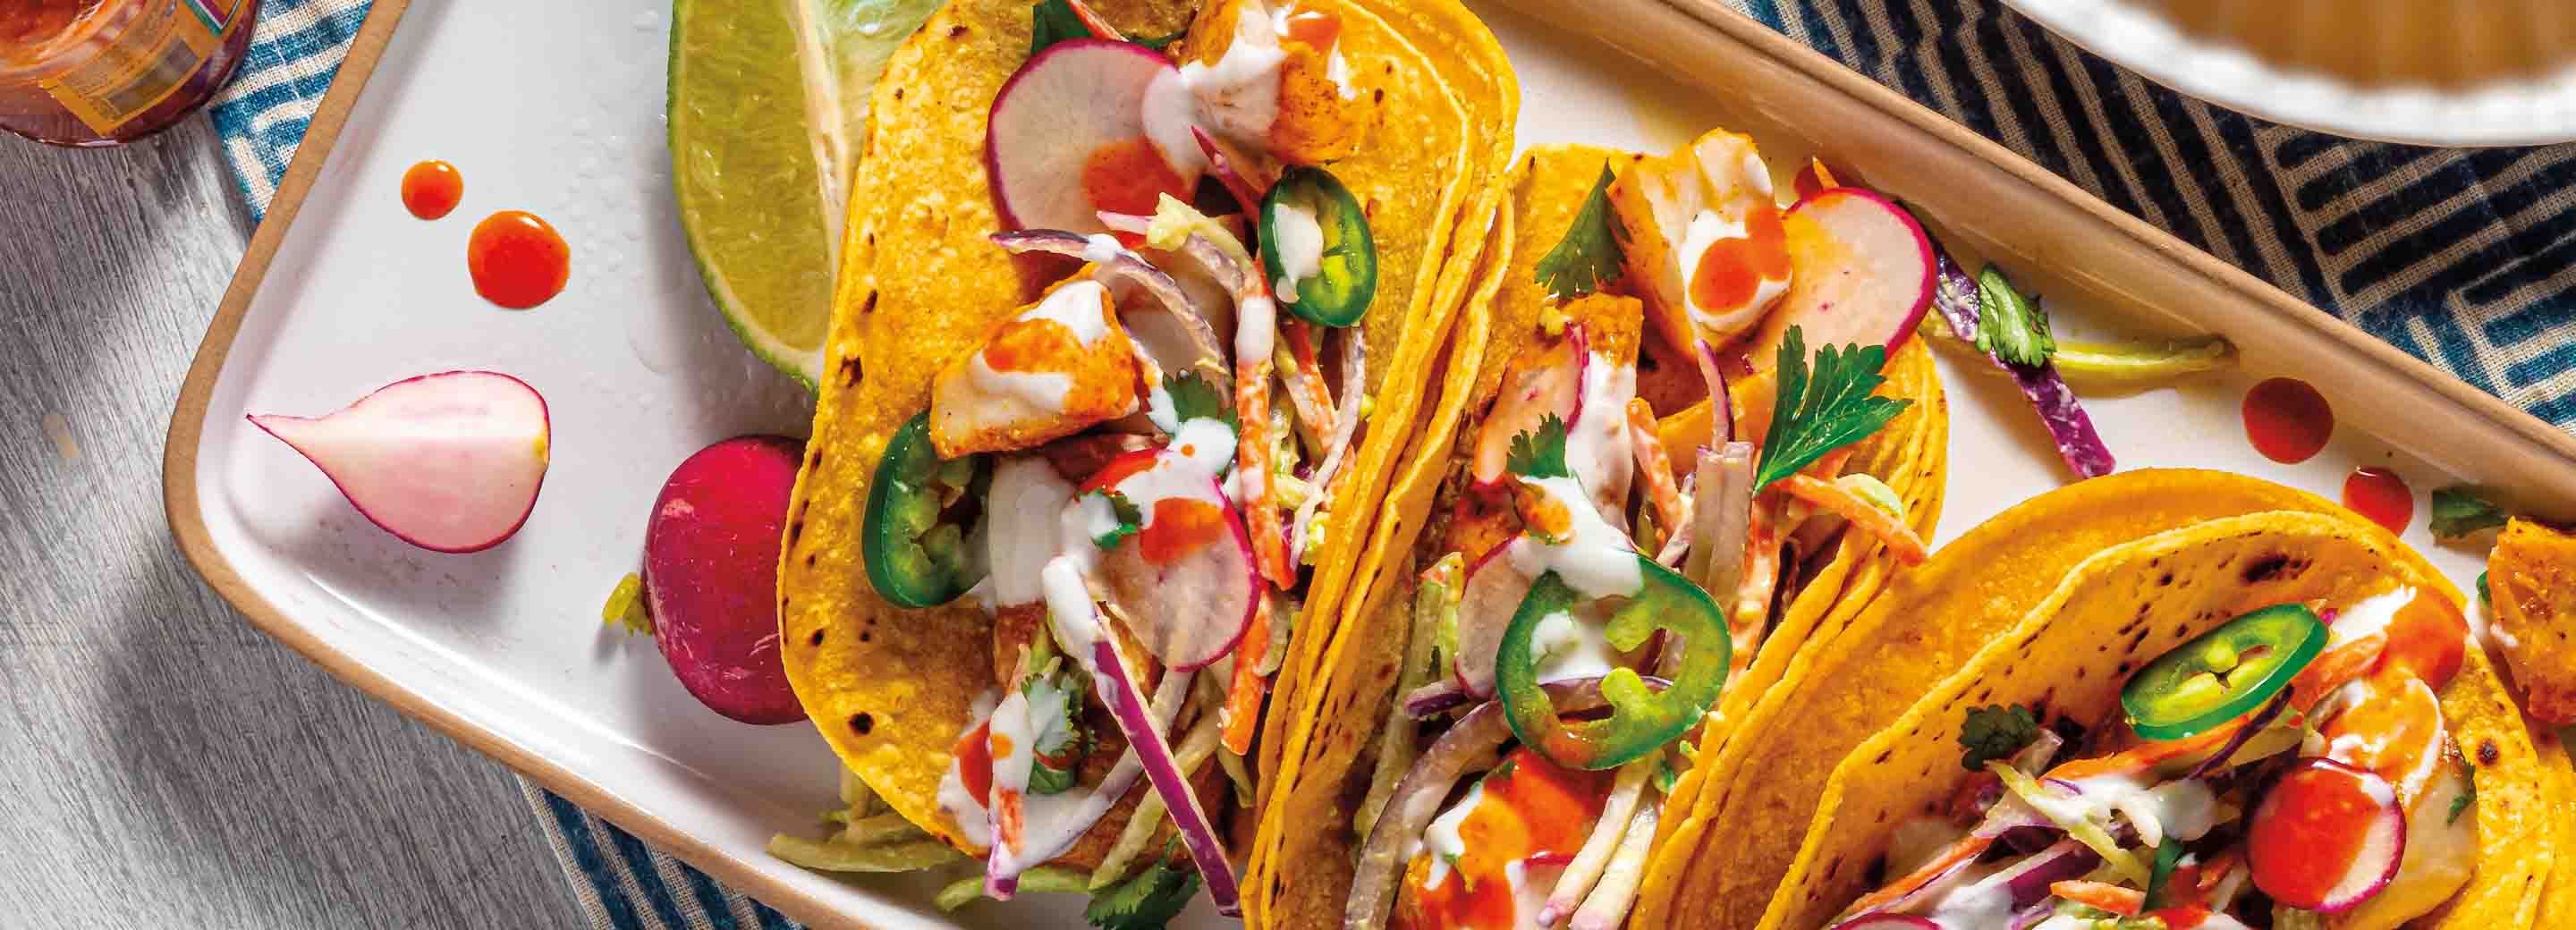 Broiled Fish Tacos With Avocado Slaw